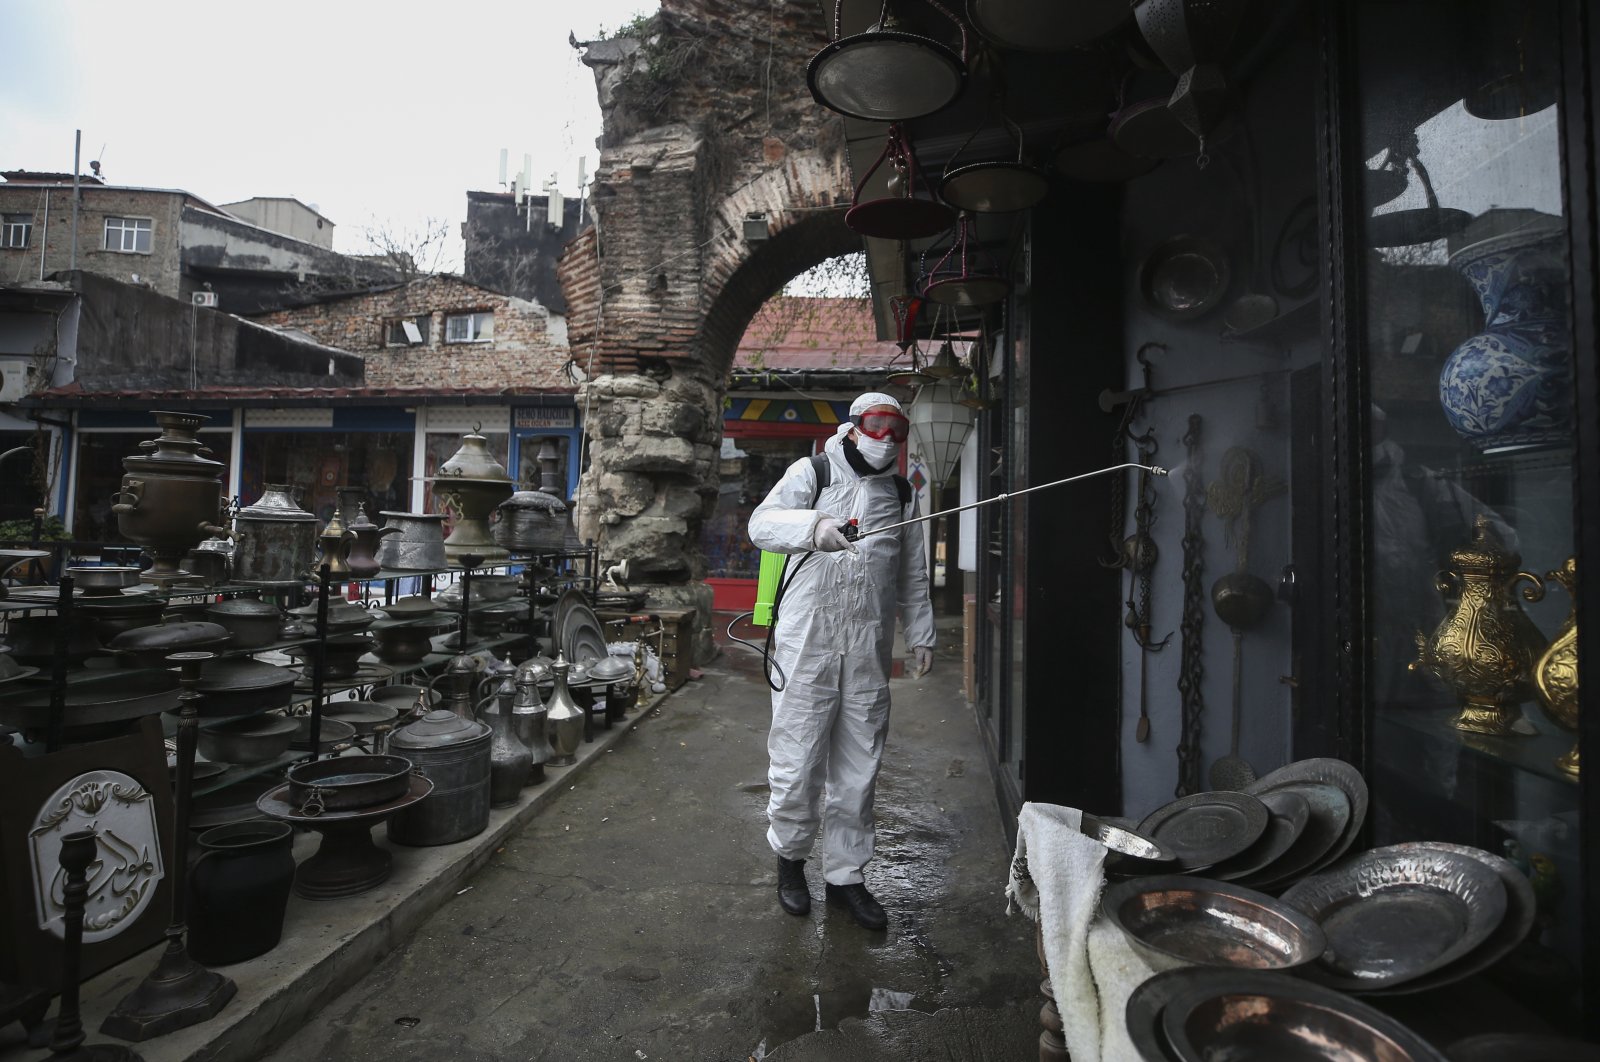 A municipality worker wearing a protective suit sprays disinfectant at the iconic Grand Bazaar in Istanbul, one of the city's main tourist attractions, that shut down amid the coronavirus outbreak, Wednesday, March 25, 2020. (AP Photo)